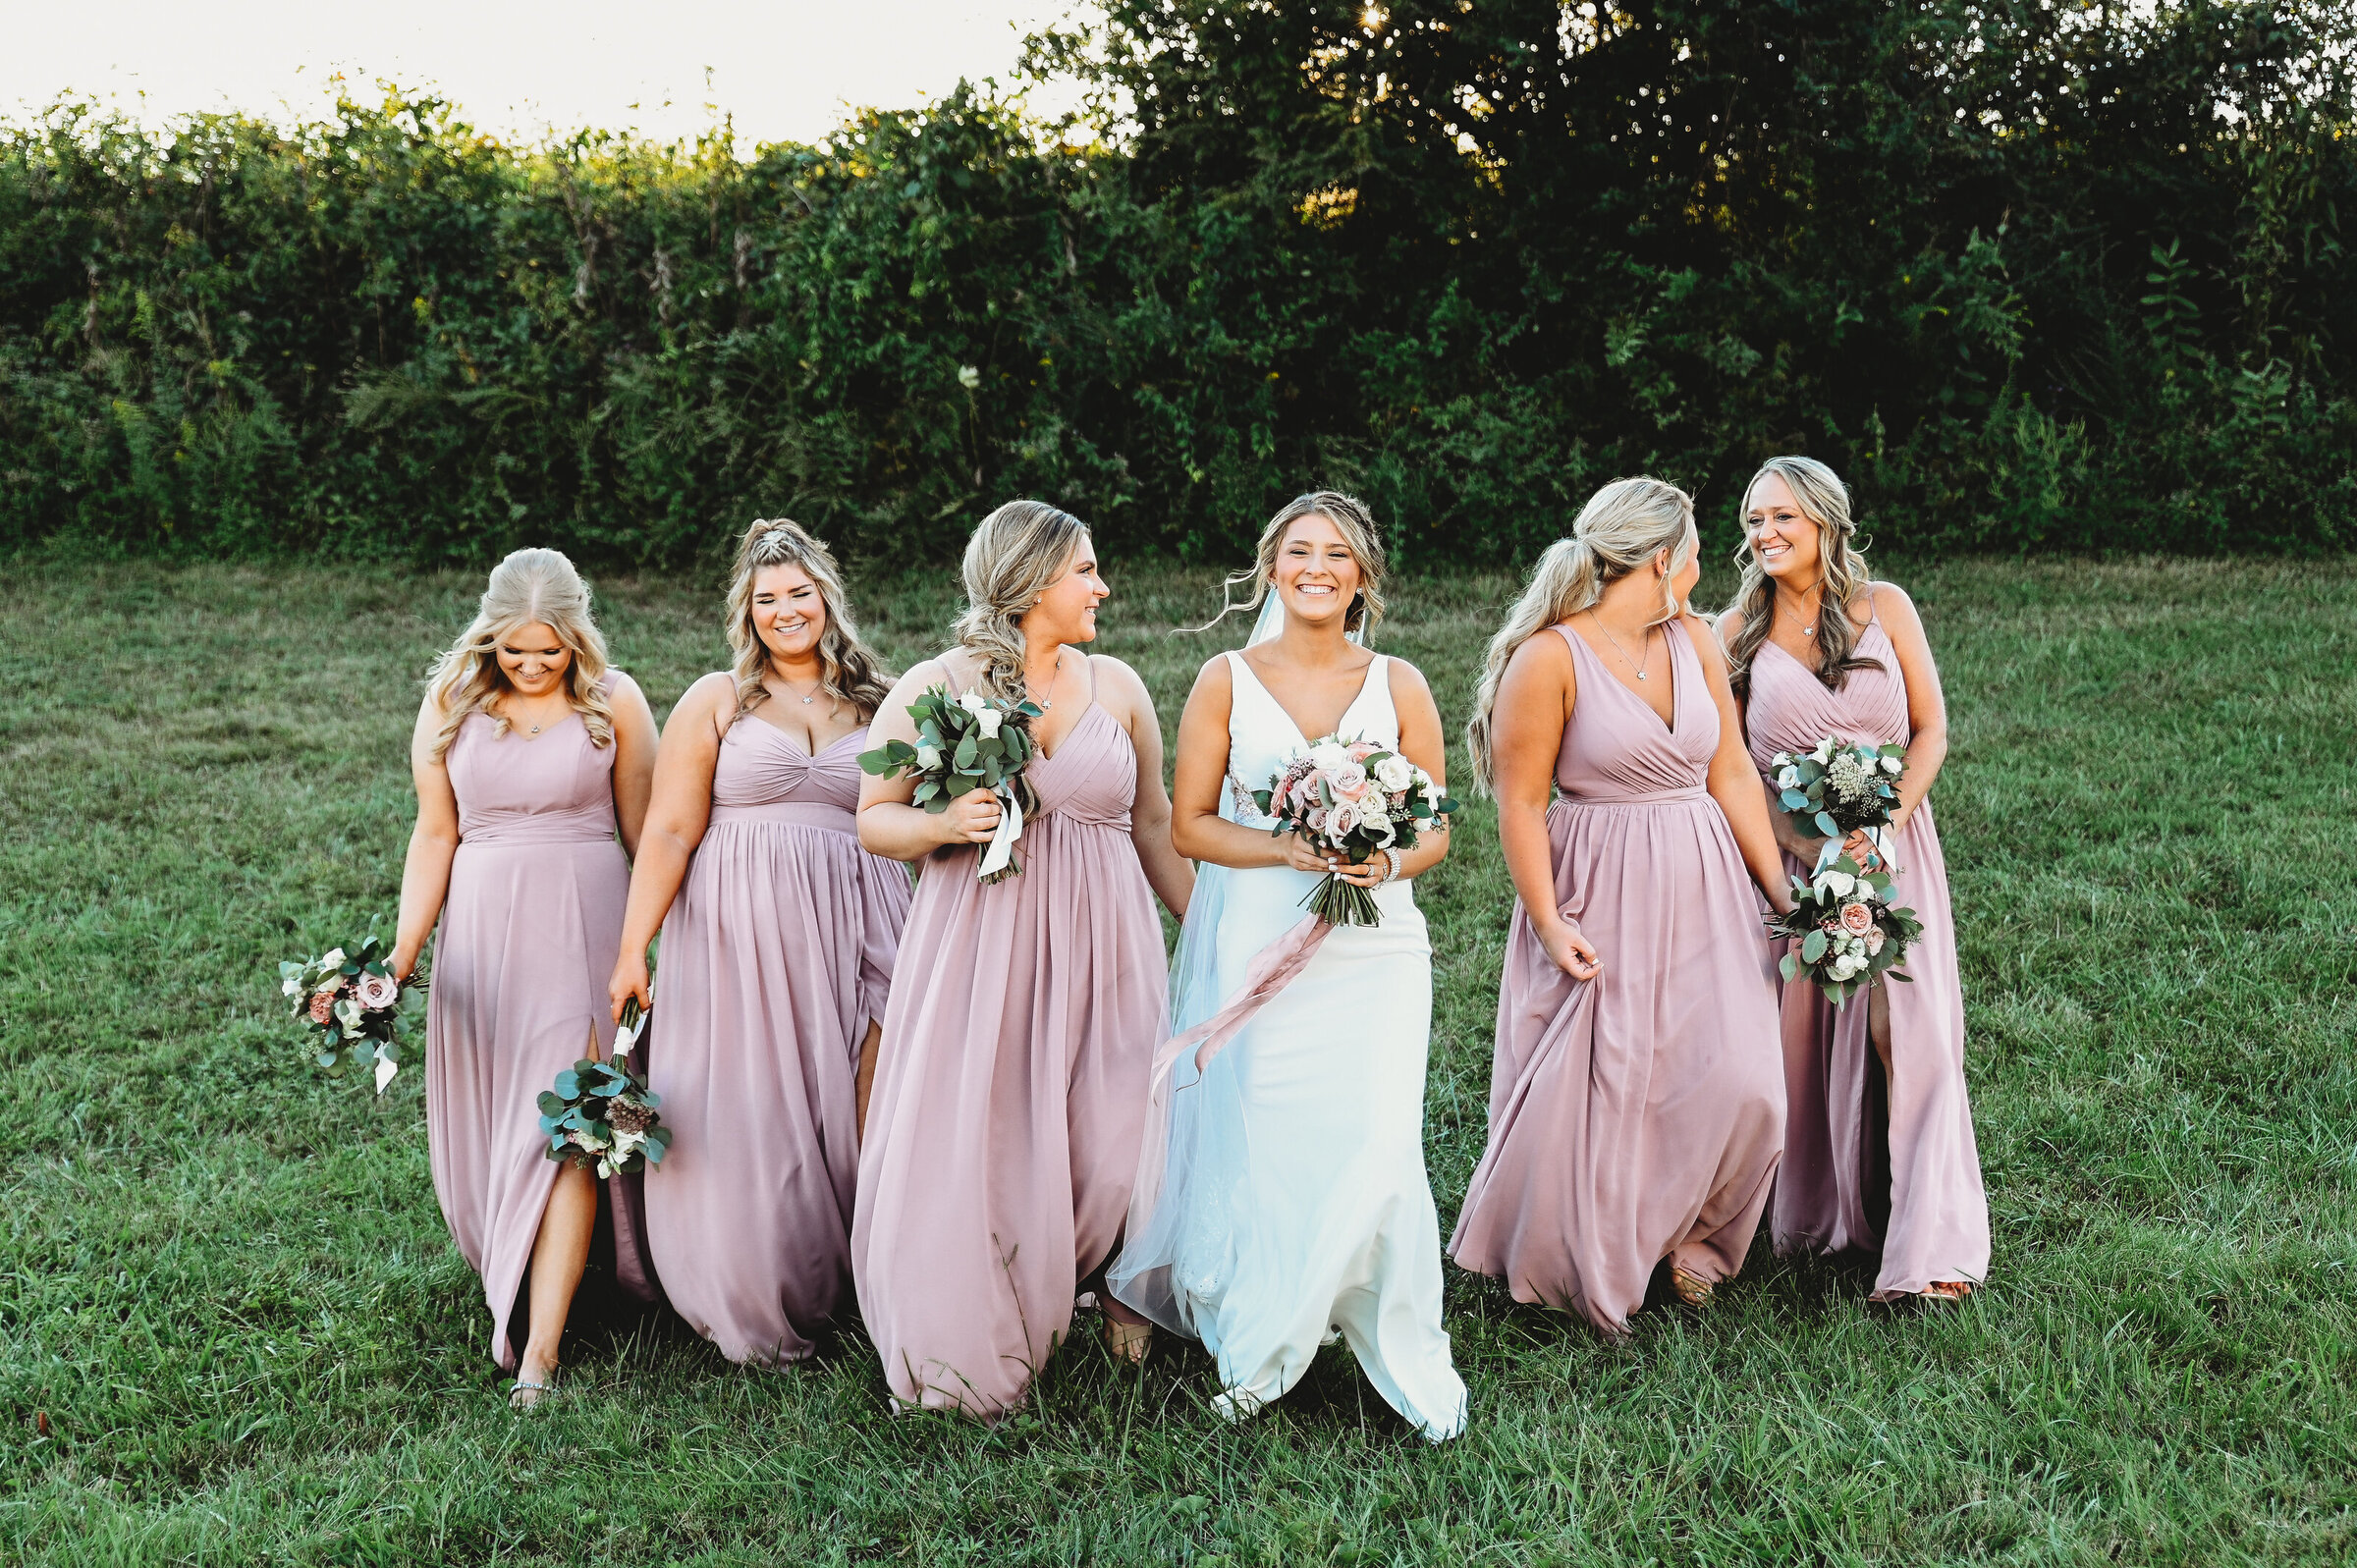 Bridesmaids wearing mauve walking with bride holding flowers